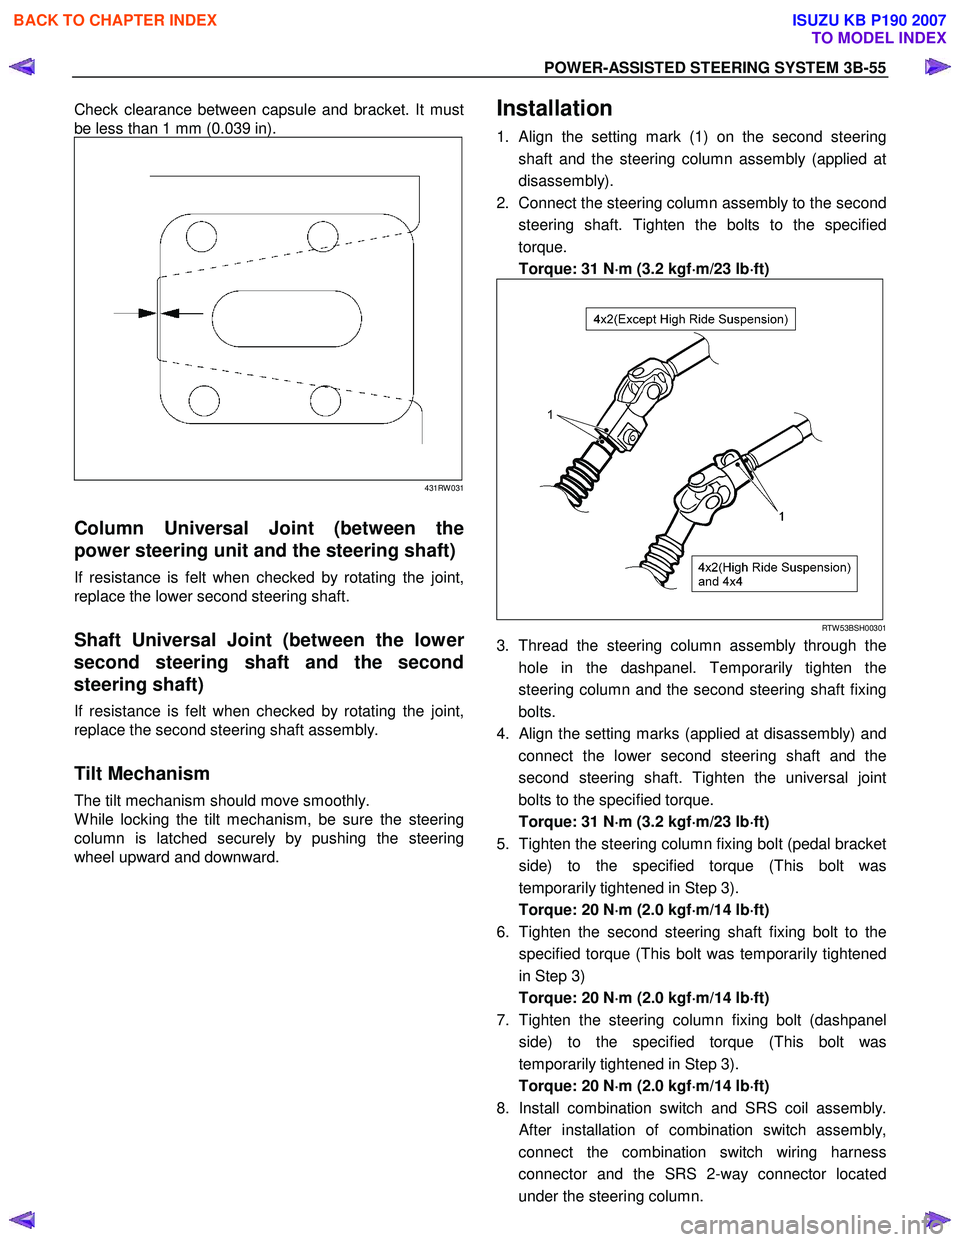 ISUZU KB P190 2007  Workshop Repair Manual POWER-ASSISTED STEERING SYSTEM 3B-55 
Check clearance between capsule and bracket. It must  
be less than 1 mm (0.039 in). 
431RW 031
 
Column Universal Joint (between the 
power steering unit and the